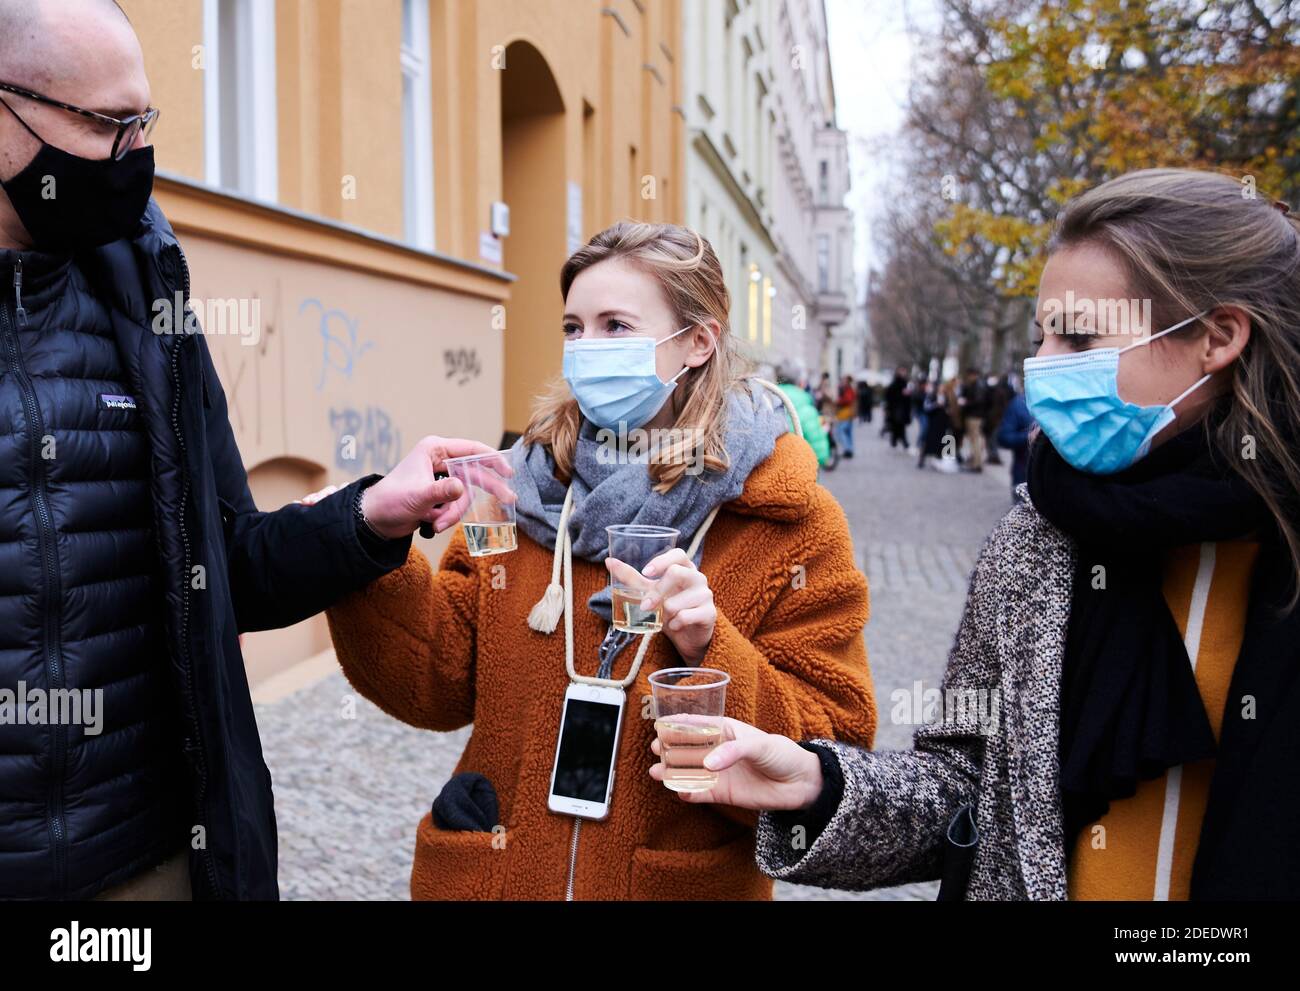 Berlin, Germany. 28th Nov, 2020. Three friends from two households stand in a so-called 'drinking zone' and drink champagne. To contain the corona pandemic, these zones are marked at a weekly market in Prenzlauer Berg with a distance of about 2 meters. Credit: Annette Riedl/dpa-Zentralbild/ZB/dpa/Alamy Live News Stock Photo